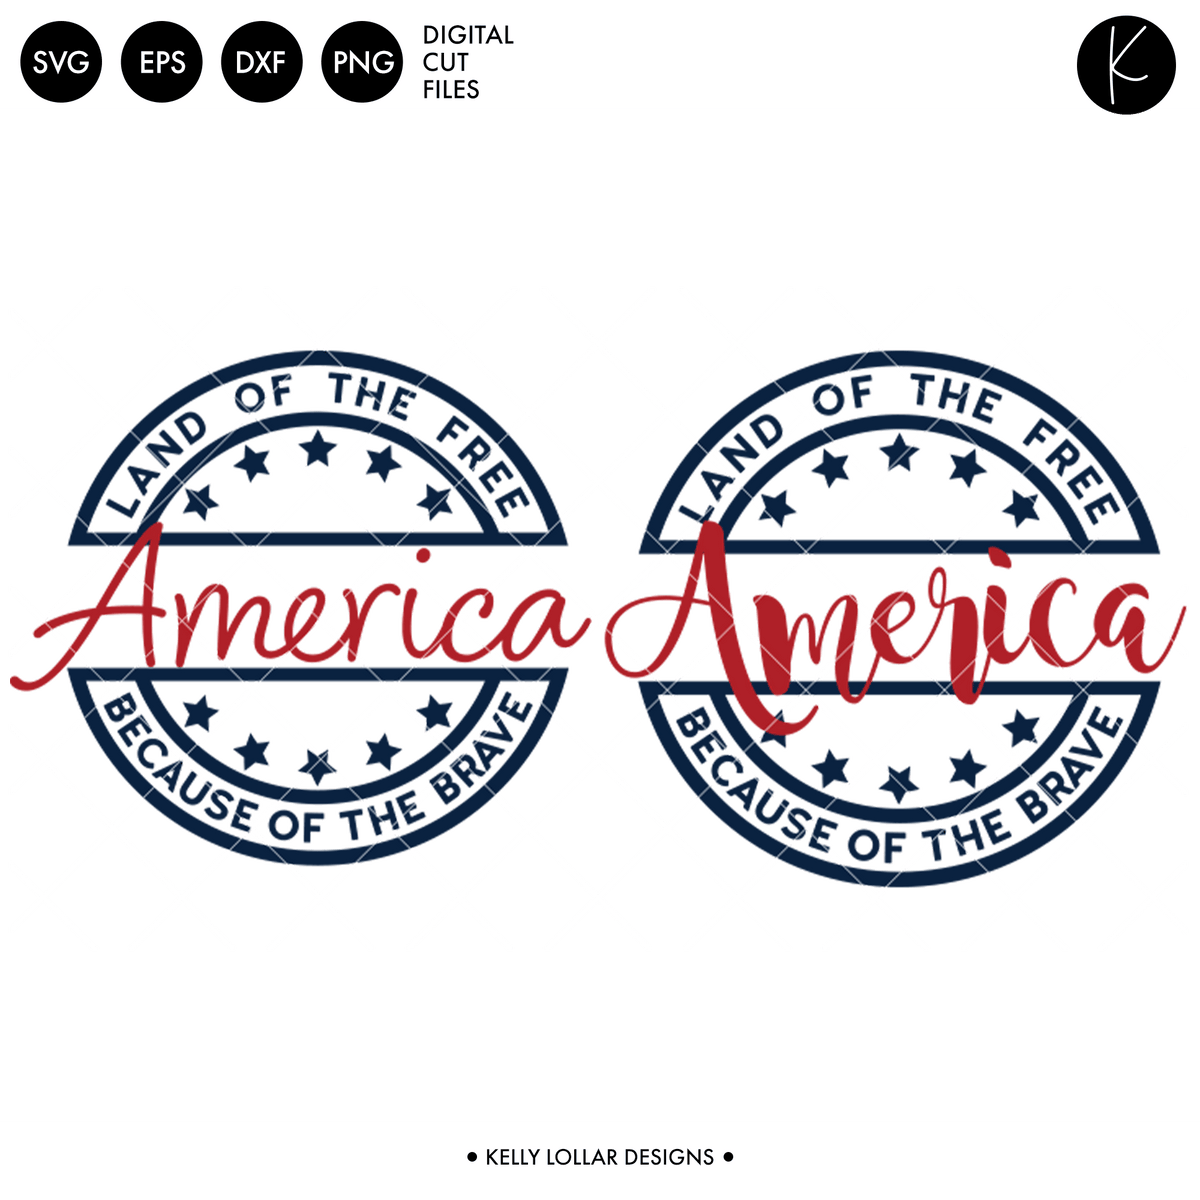 America: Land of the Free Because of the Brave SVG DXF EPS PNG Cut Files